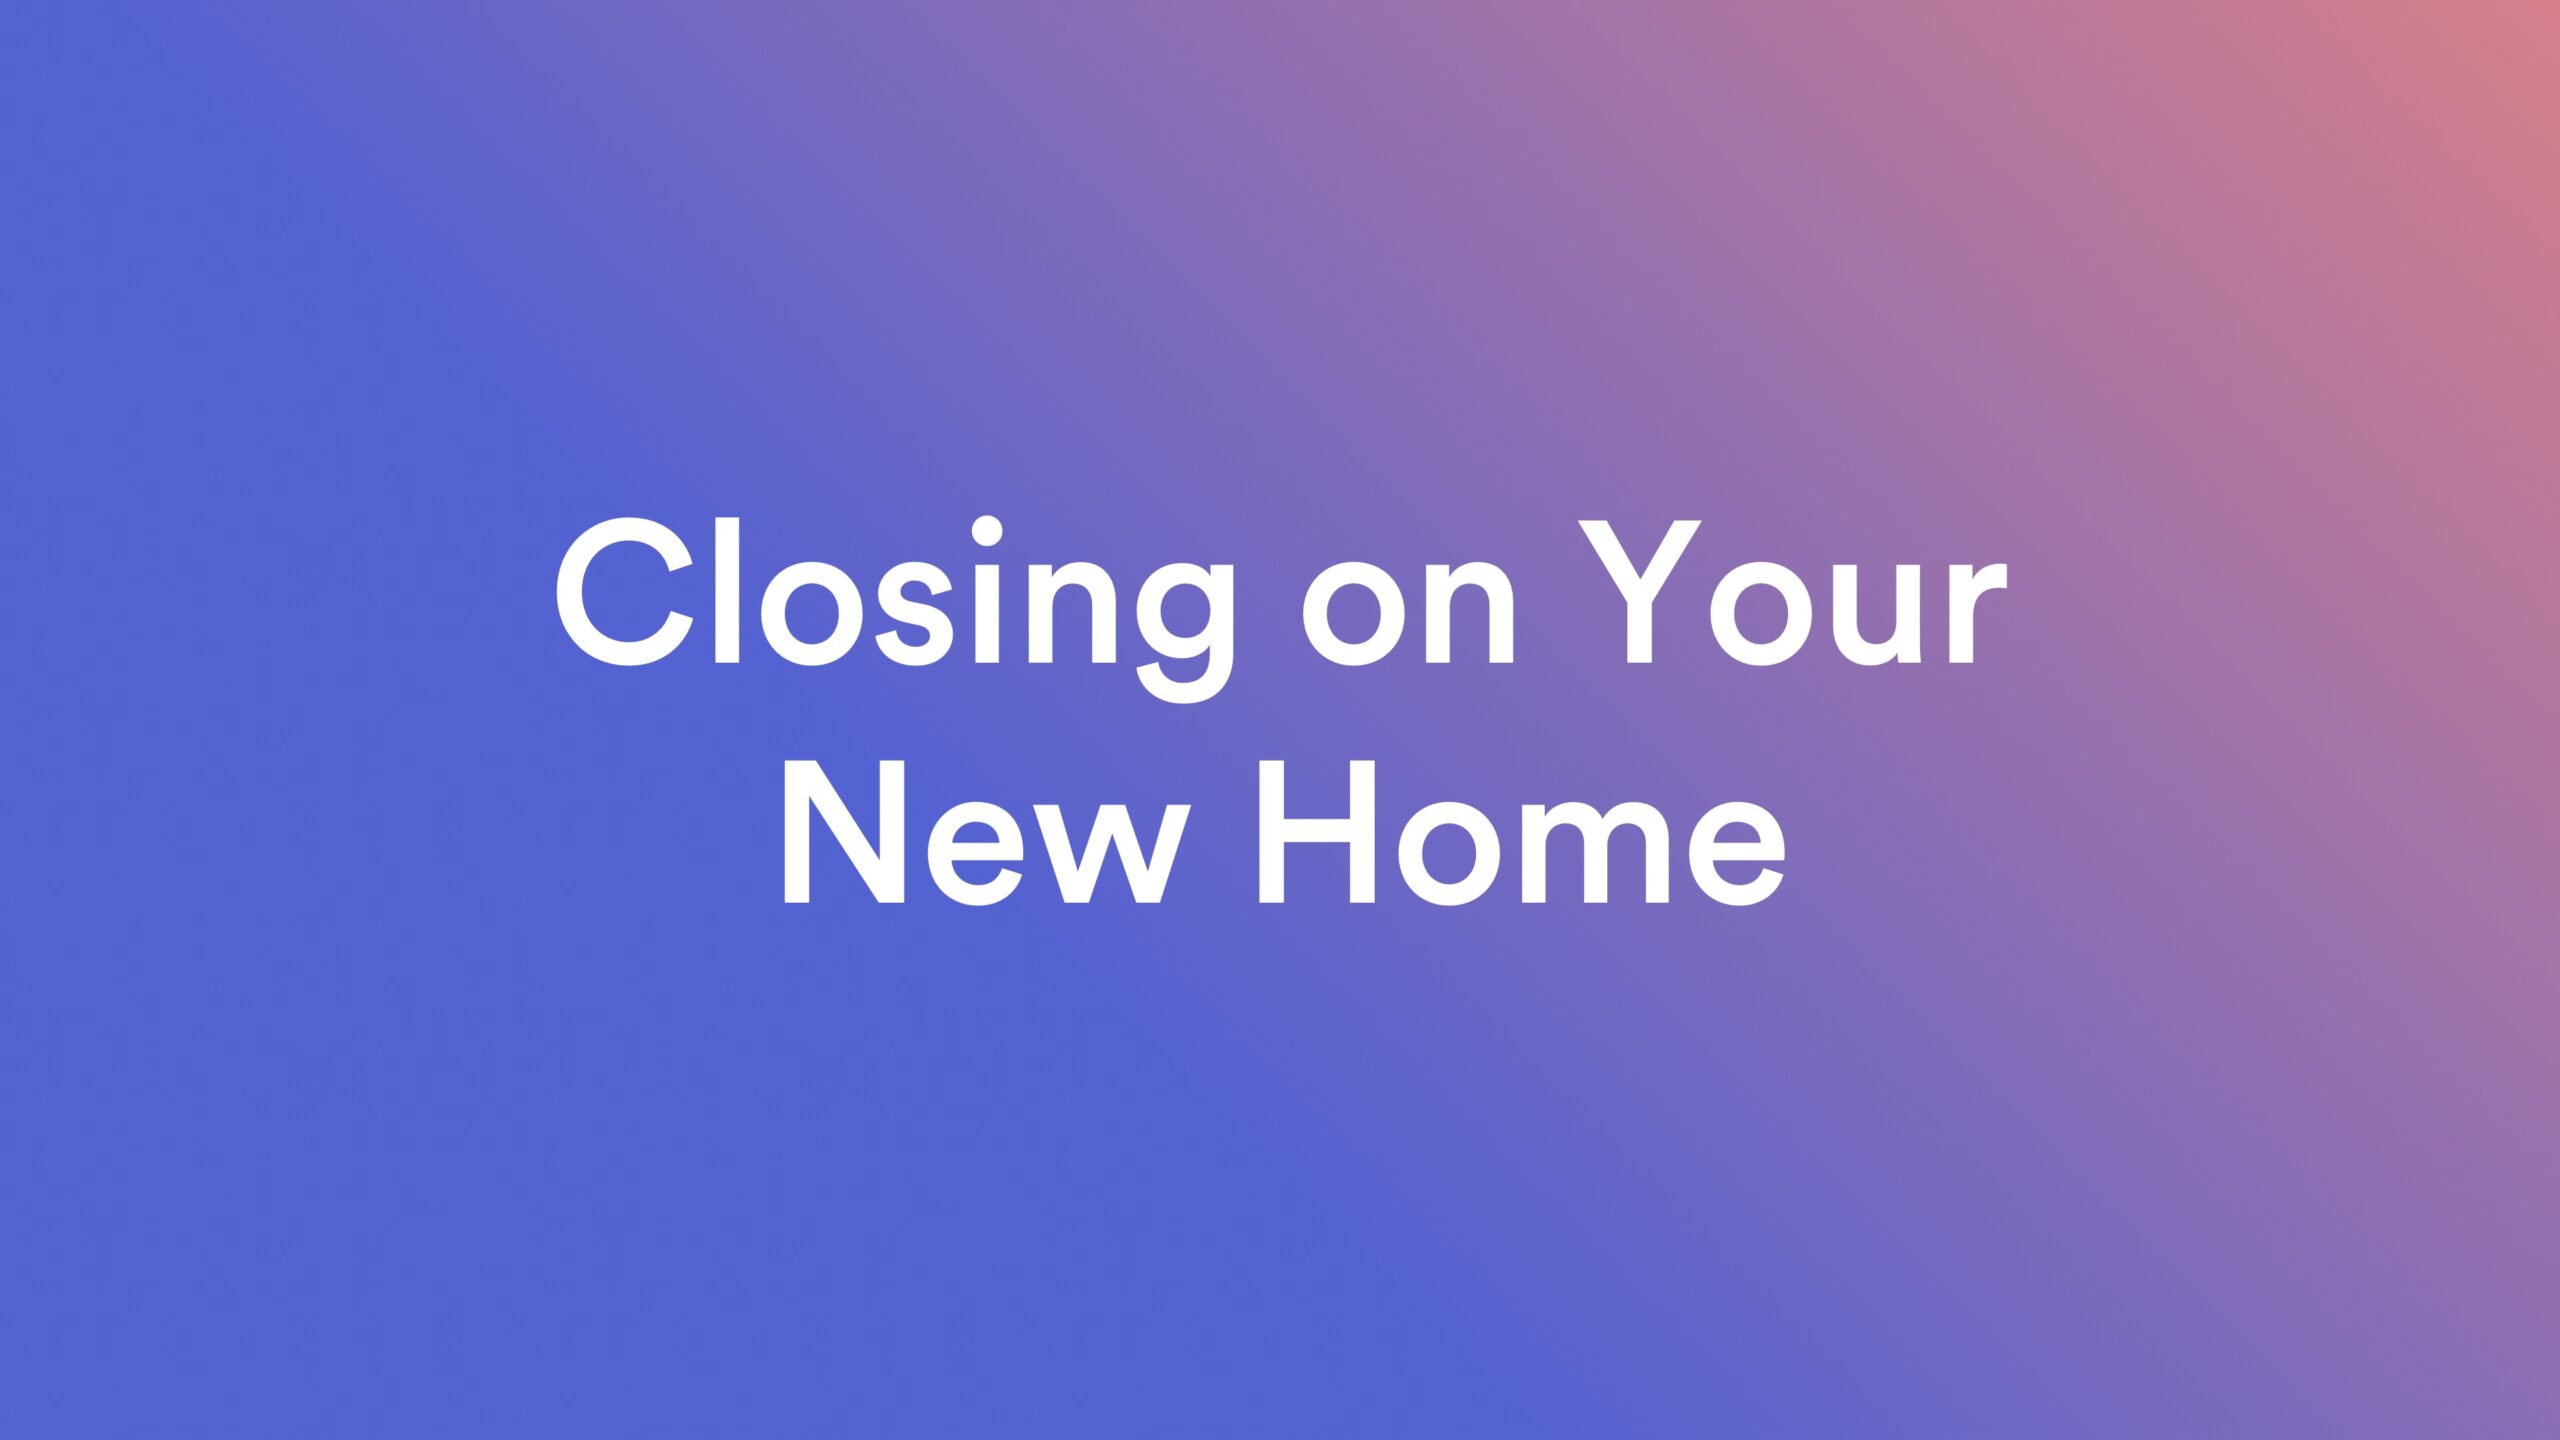 Graphic: Closing on your new home with Homebuyer.com